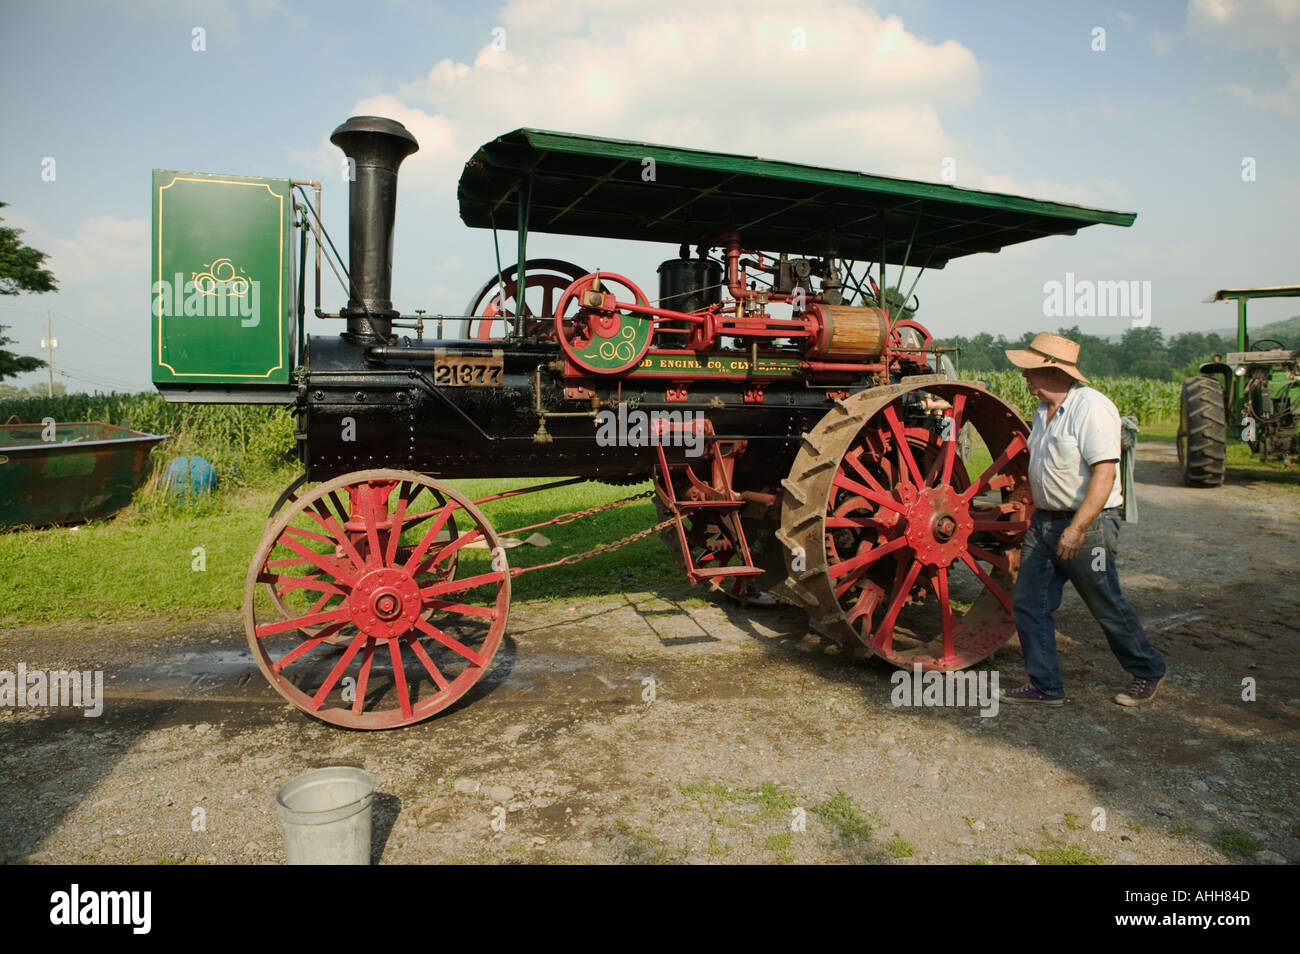 Farmer Steve Davis restores a 1914 antique steam traction engine Winfield New York Great Western Turnpike Route 20 Stock Photo